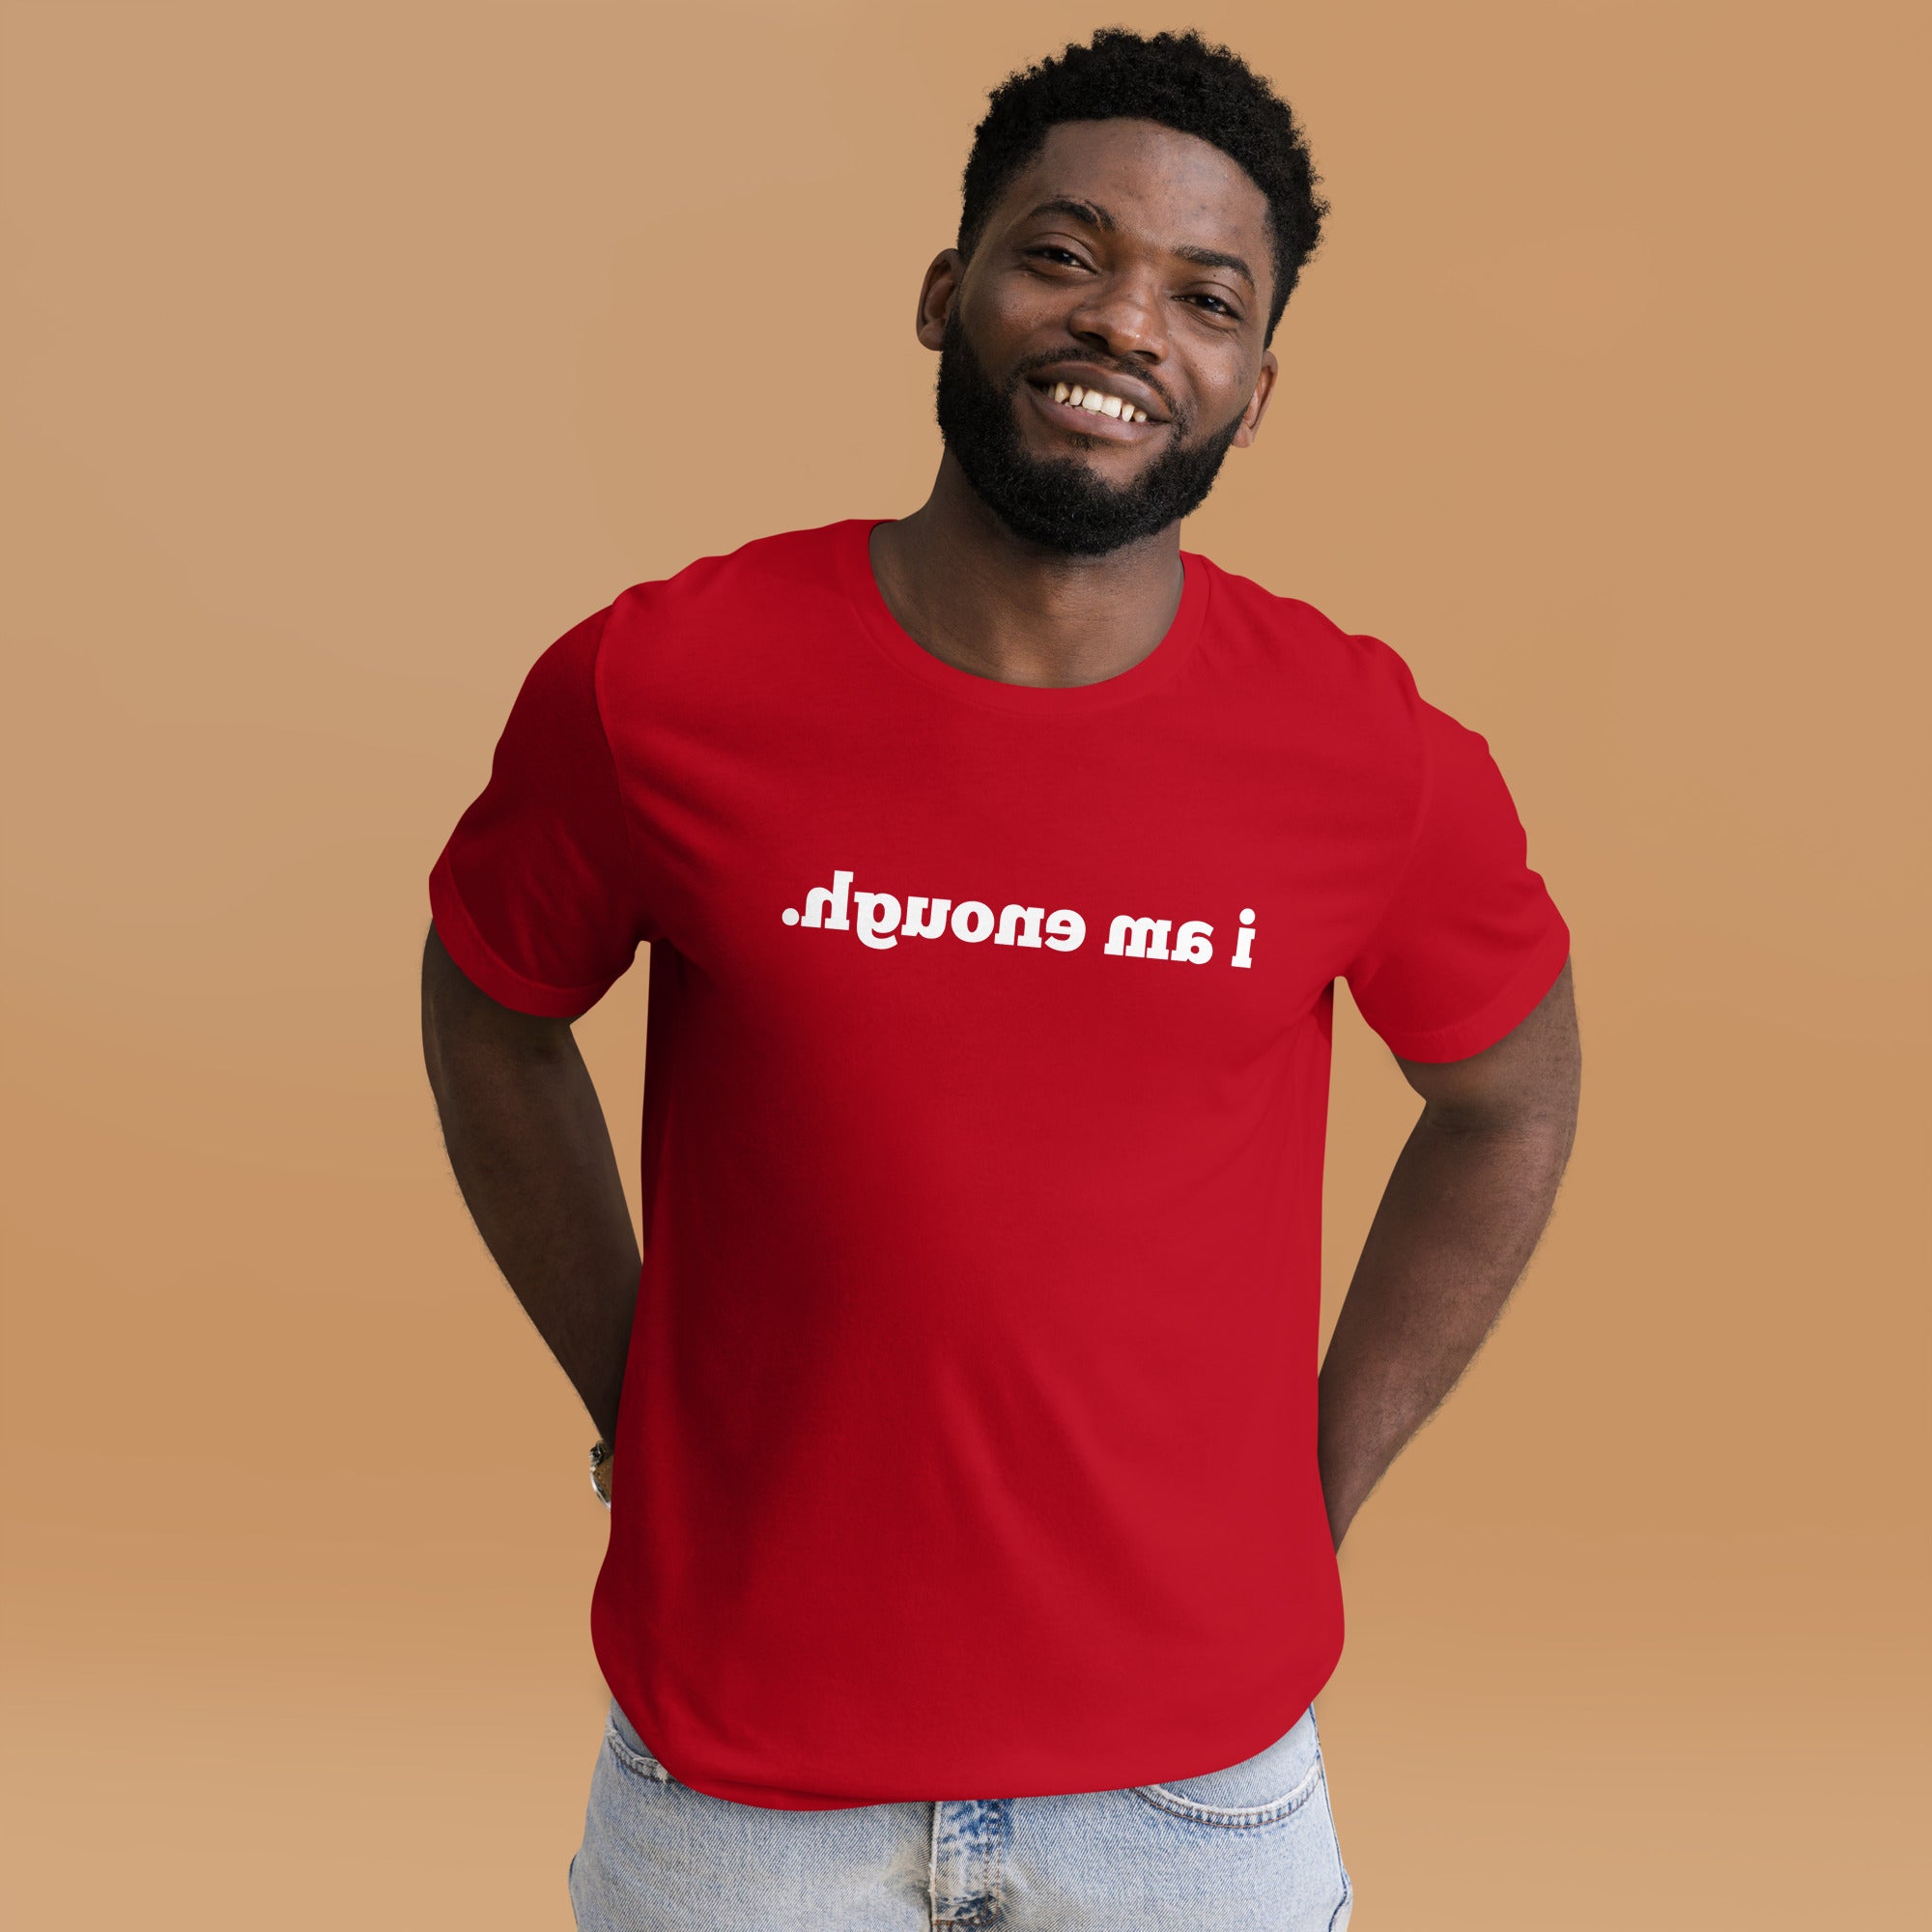 I AM ENOUGH Mirror Affirmation Tee (Unisex, 14 COLORS!)